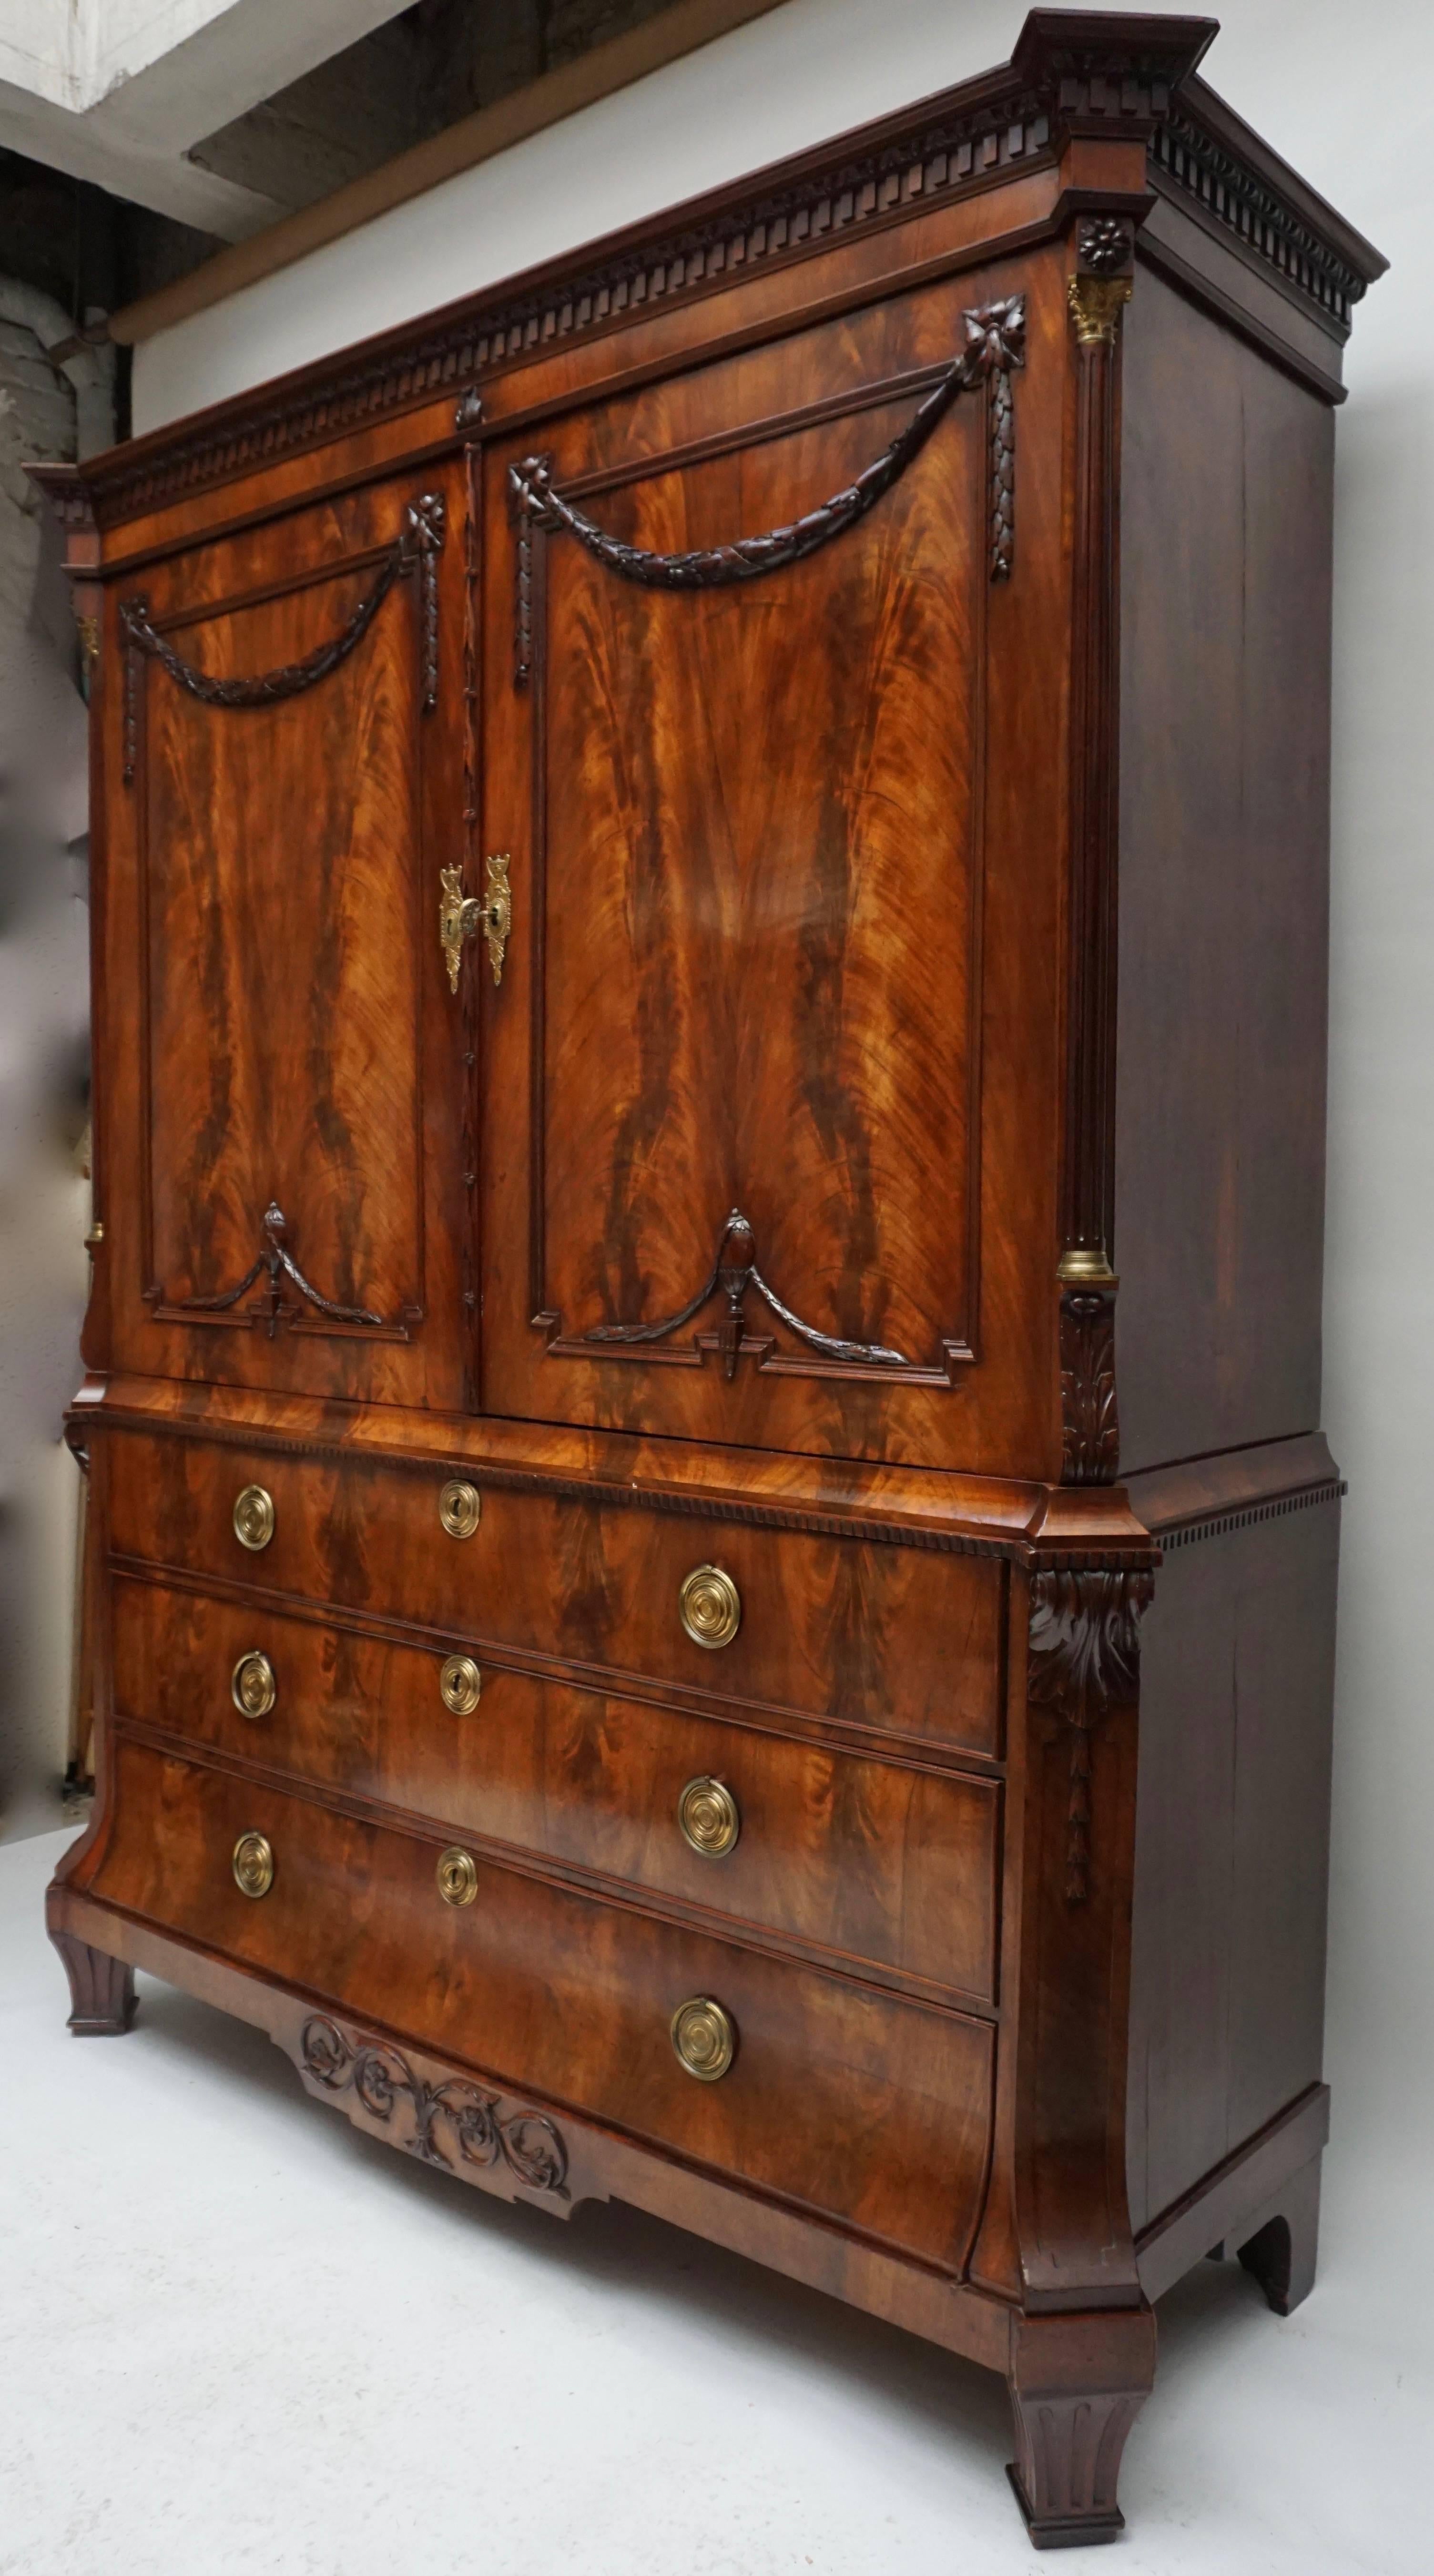 A magnificent mahogany neoclassical Dutch cabinet, the underpart with three graduated drawers under a pair of cupboard doors, the whole with chamfered corners with elegant reeded Corinthian columns in the upper part.
The doors are decorated with